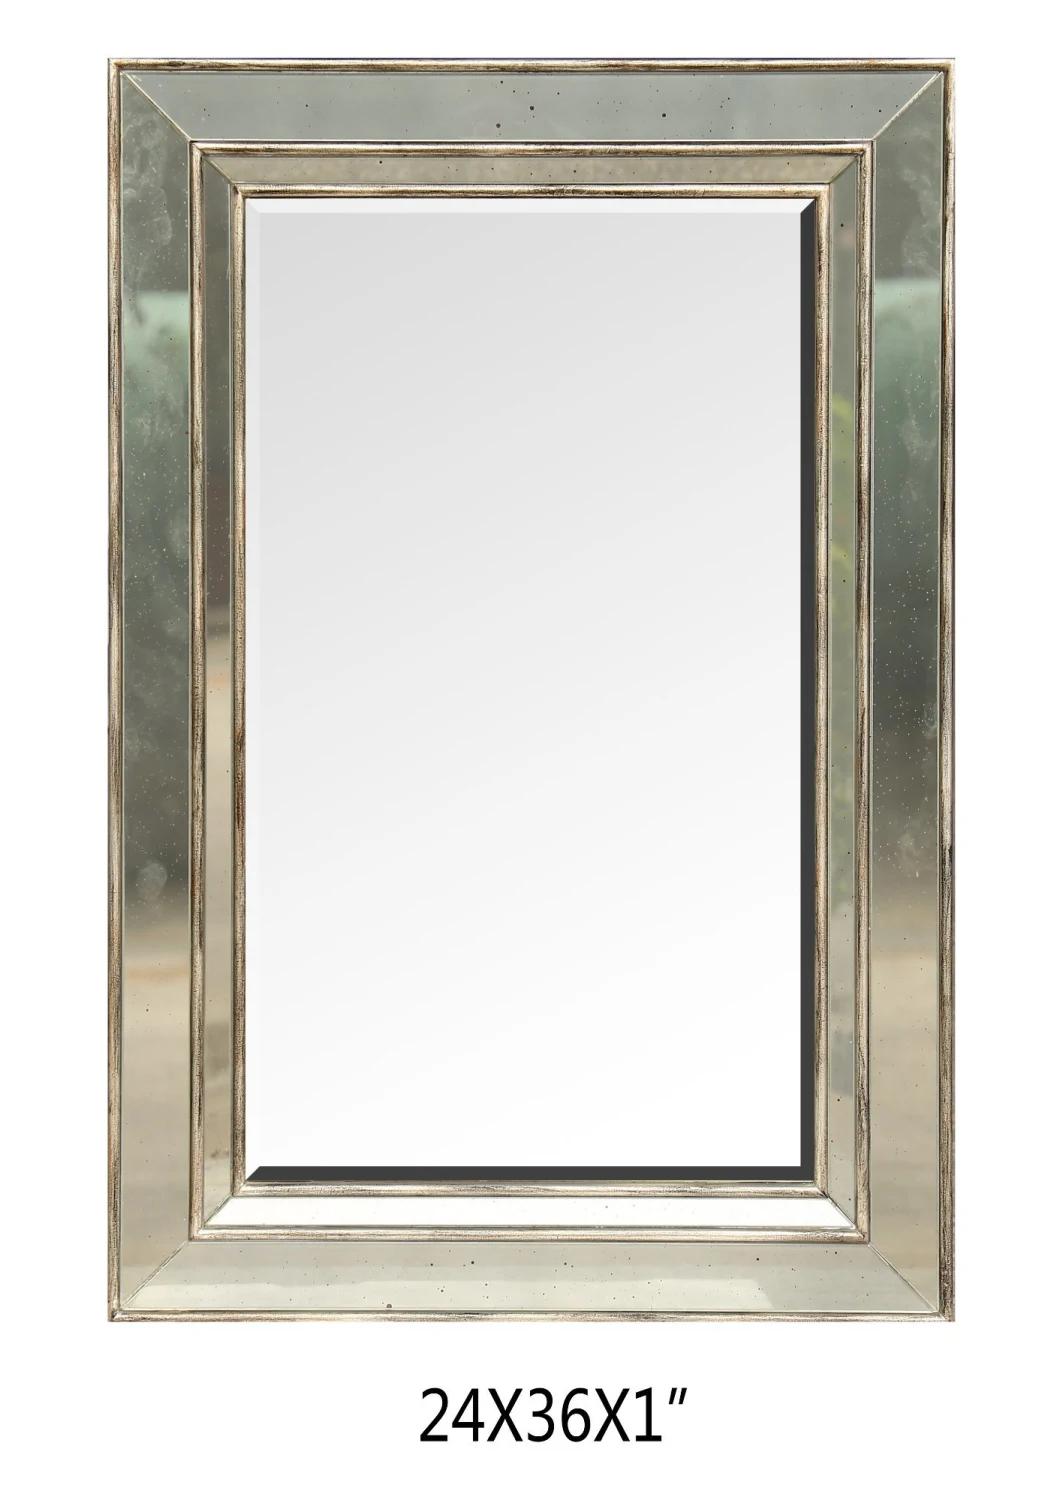 Wall- Mounted Mirror Bedroom Bathroom Large Flat Framed Wall Mirror W/3 Inch Edge, Beveled Mirror Frame Premium Silver Glass Panel Mirror Rectangle